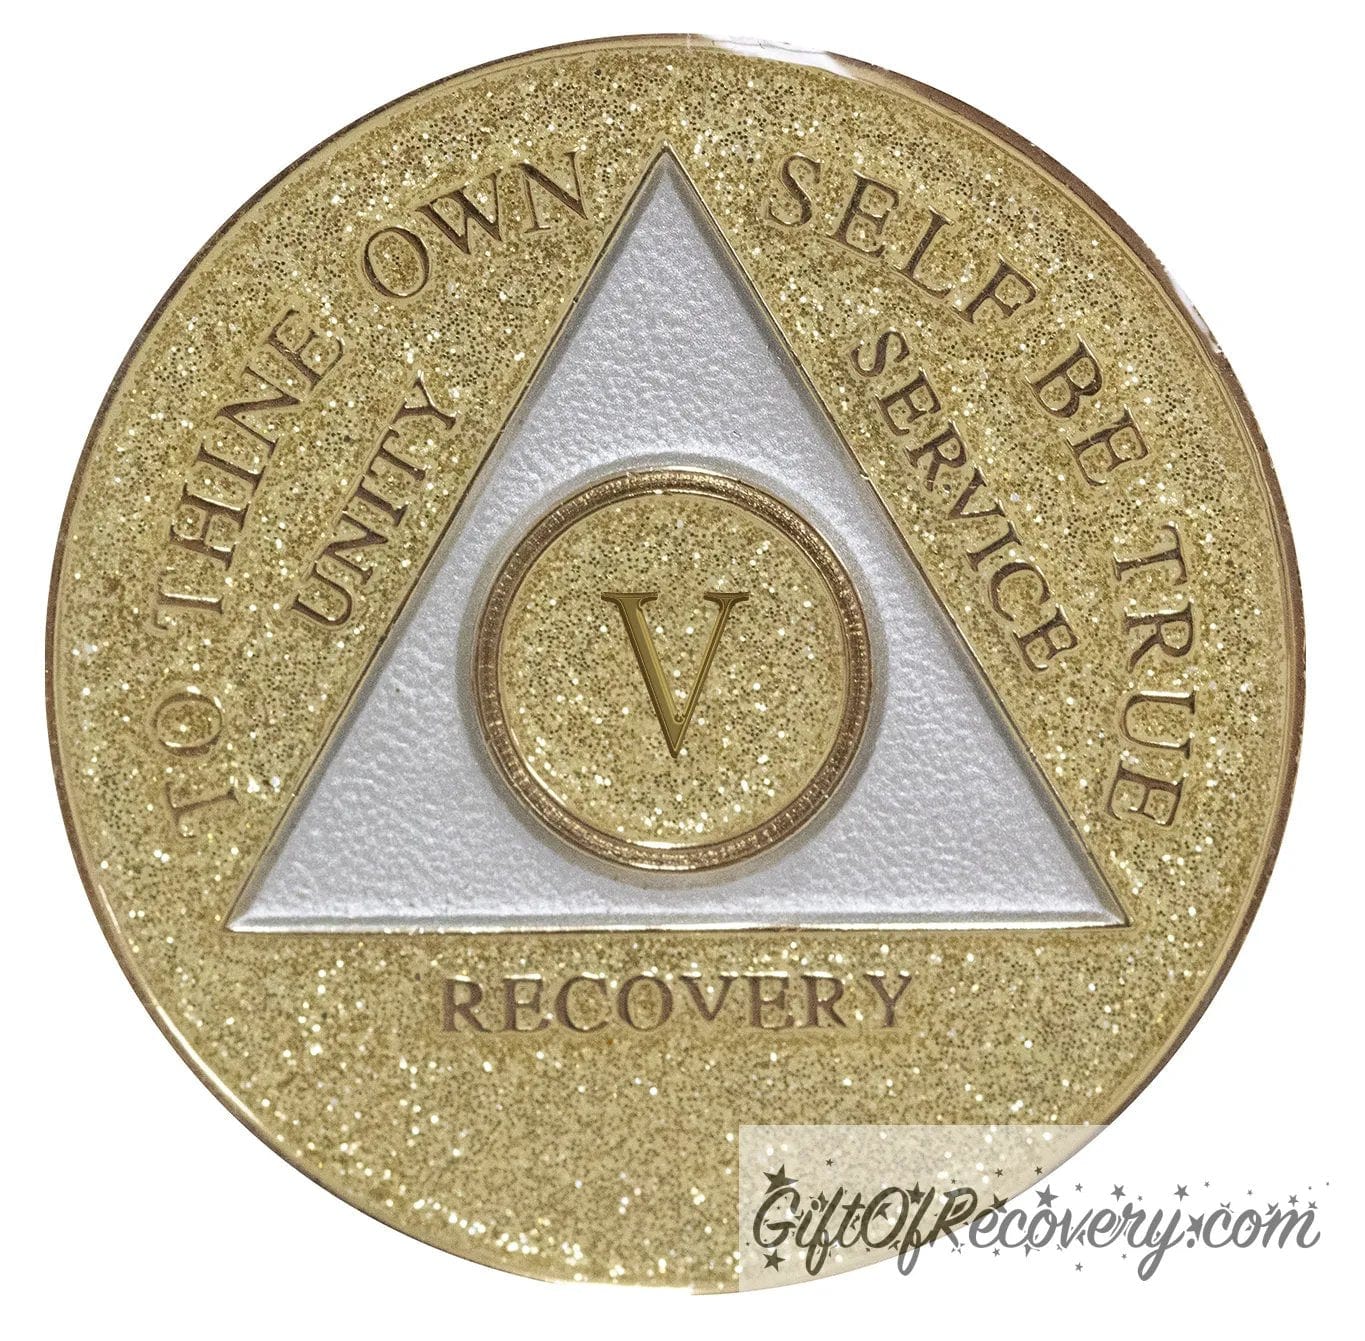 5 year AA medallion Gold glitter, with the triangle pearl white and to thine own self be true, unity, service, recovery, and the roman numeral embossed with 14k gold-plated brass, the recovery medallion is sealed with resin for a shiny finish that will last and is scratch proof.